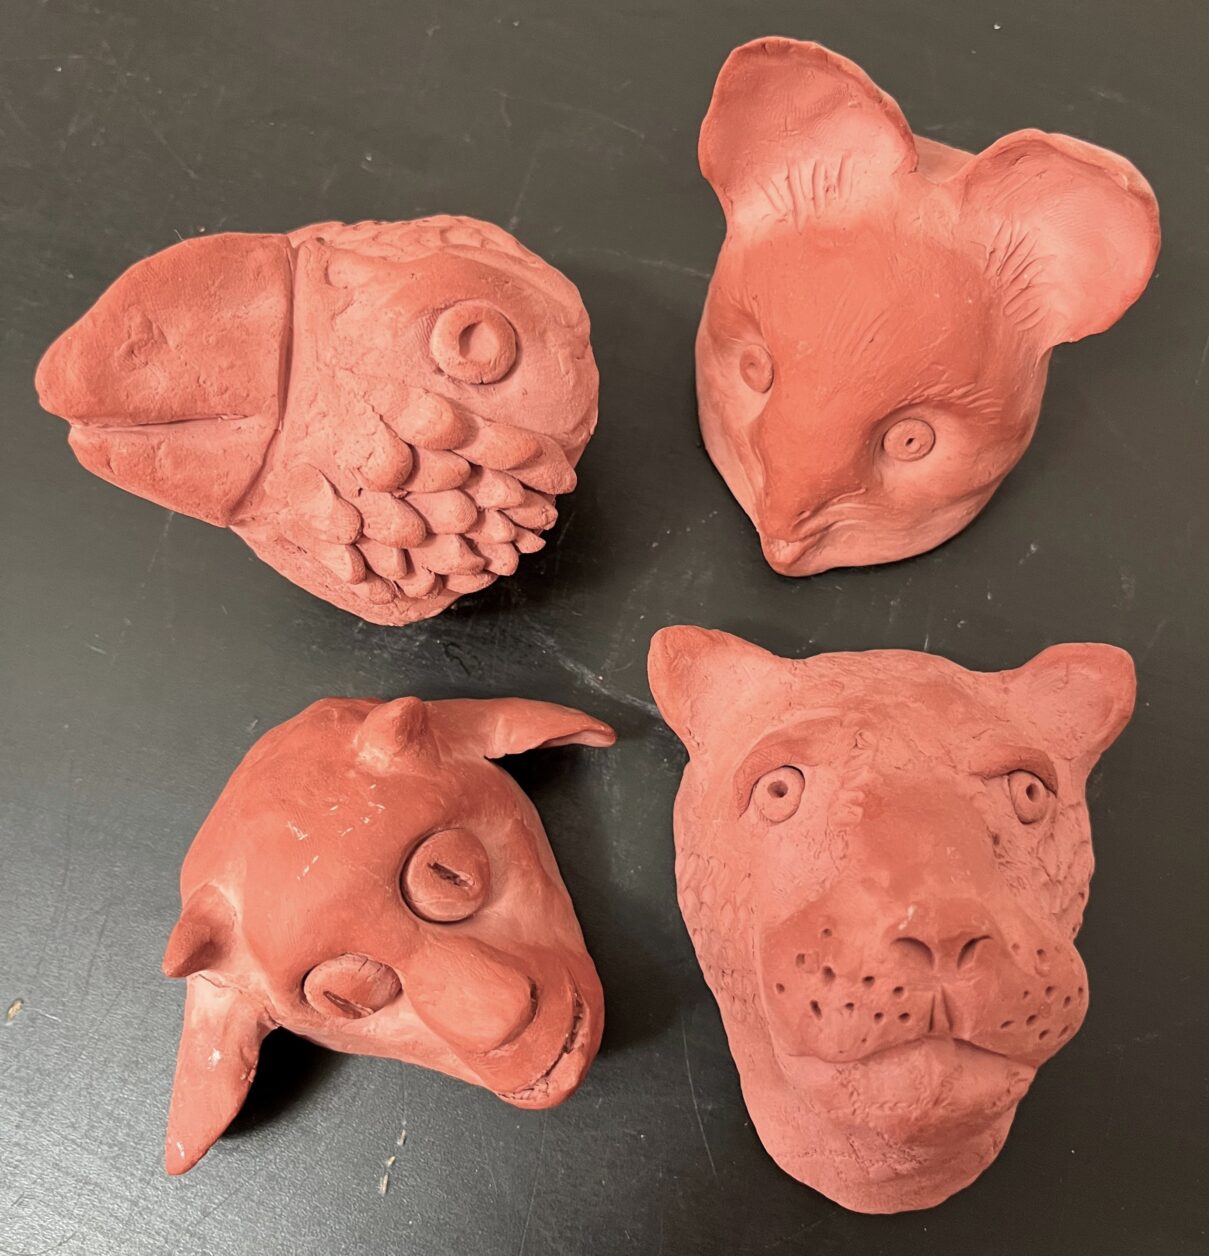 Four unpainted, sculpted clay animal heads - a bird, mouse, goat, and jaguar.